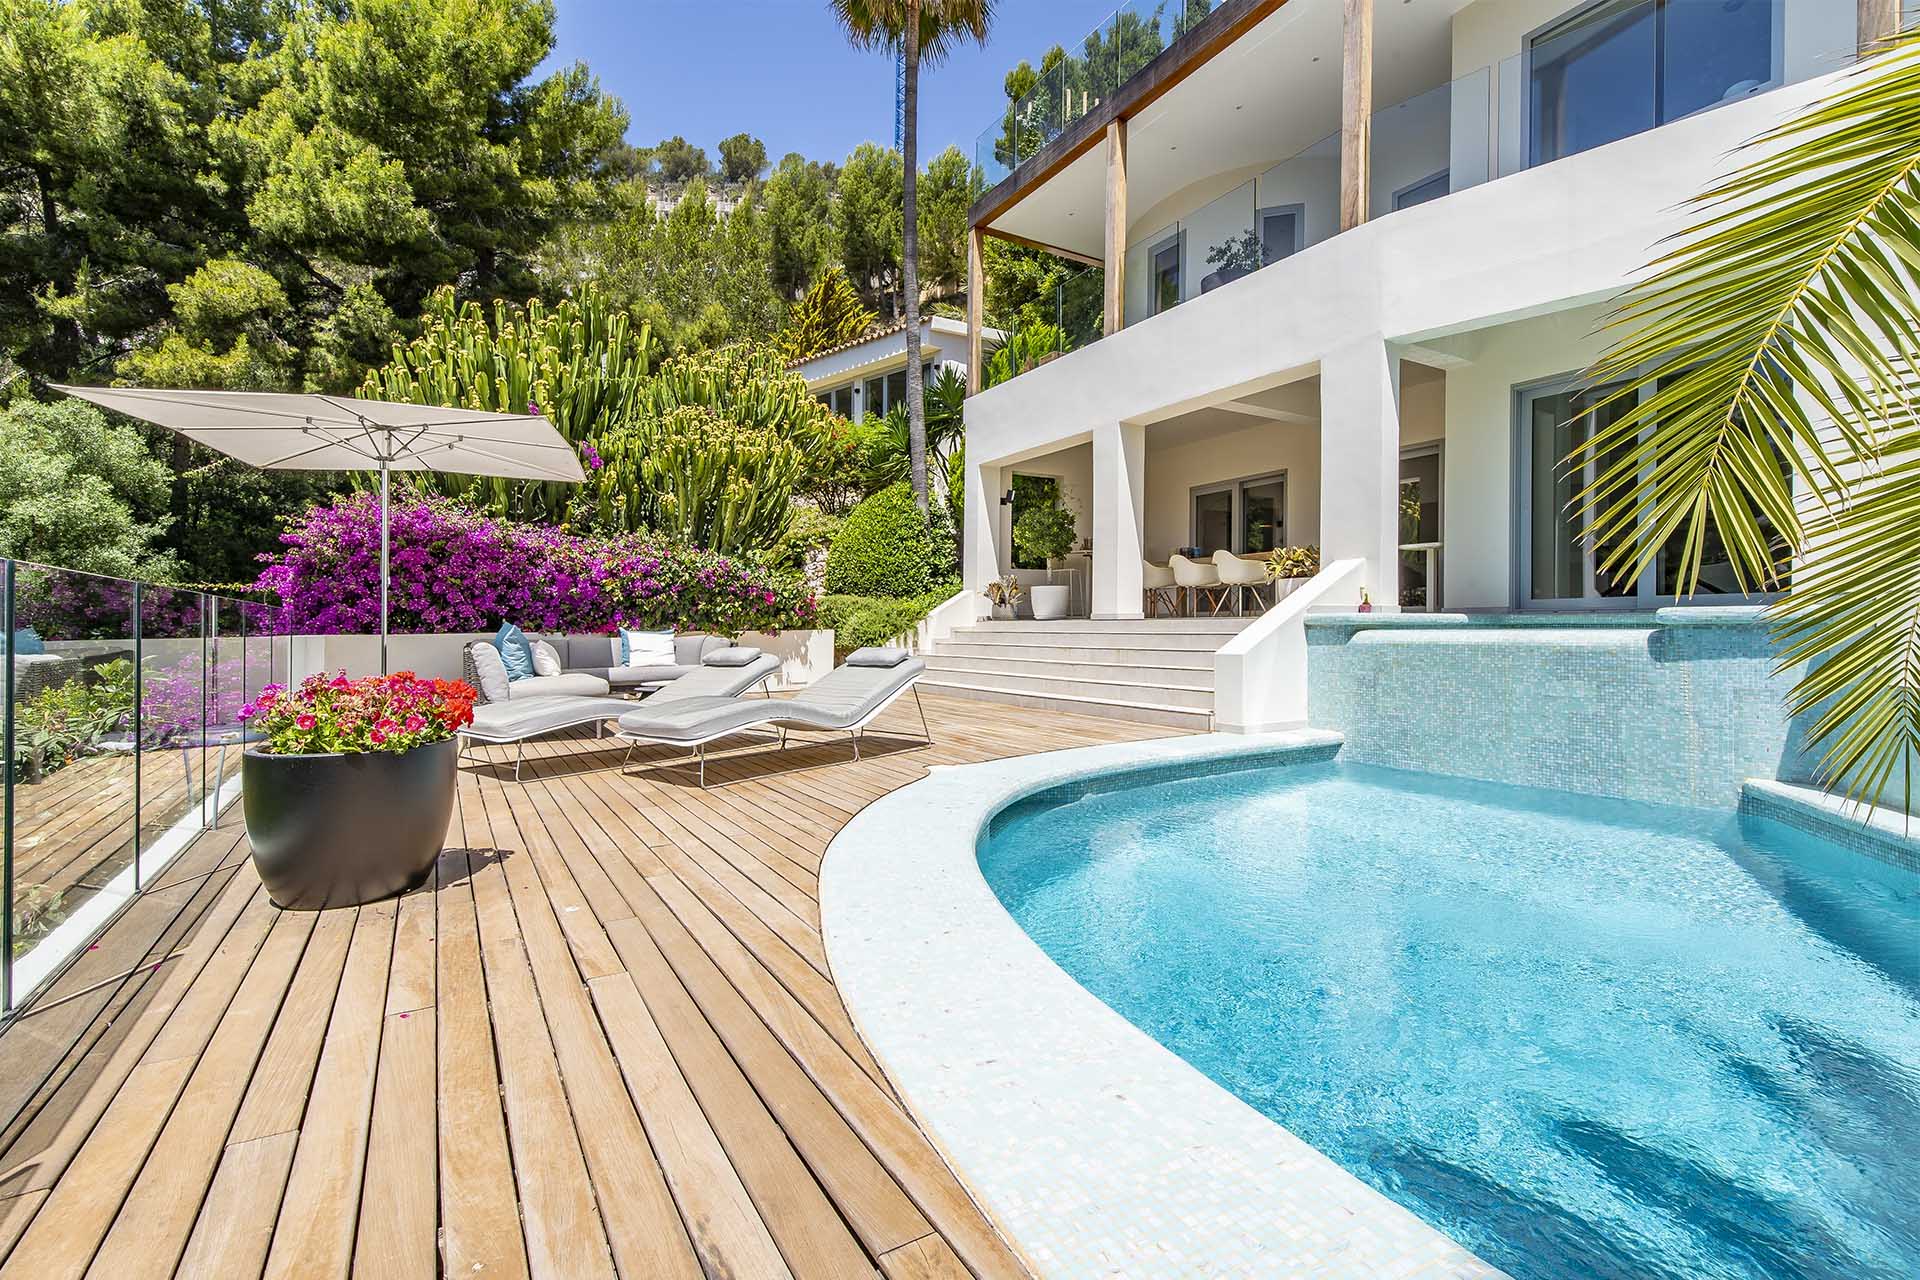 Transferring your holiday property wisely can save a lot of money